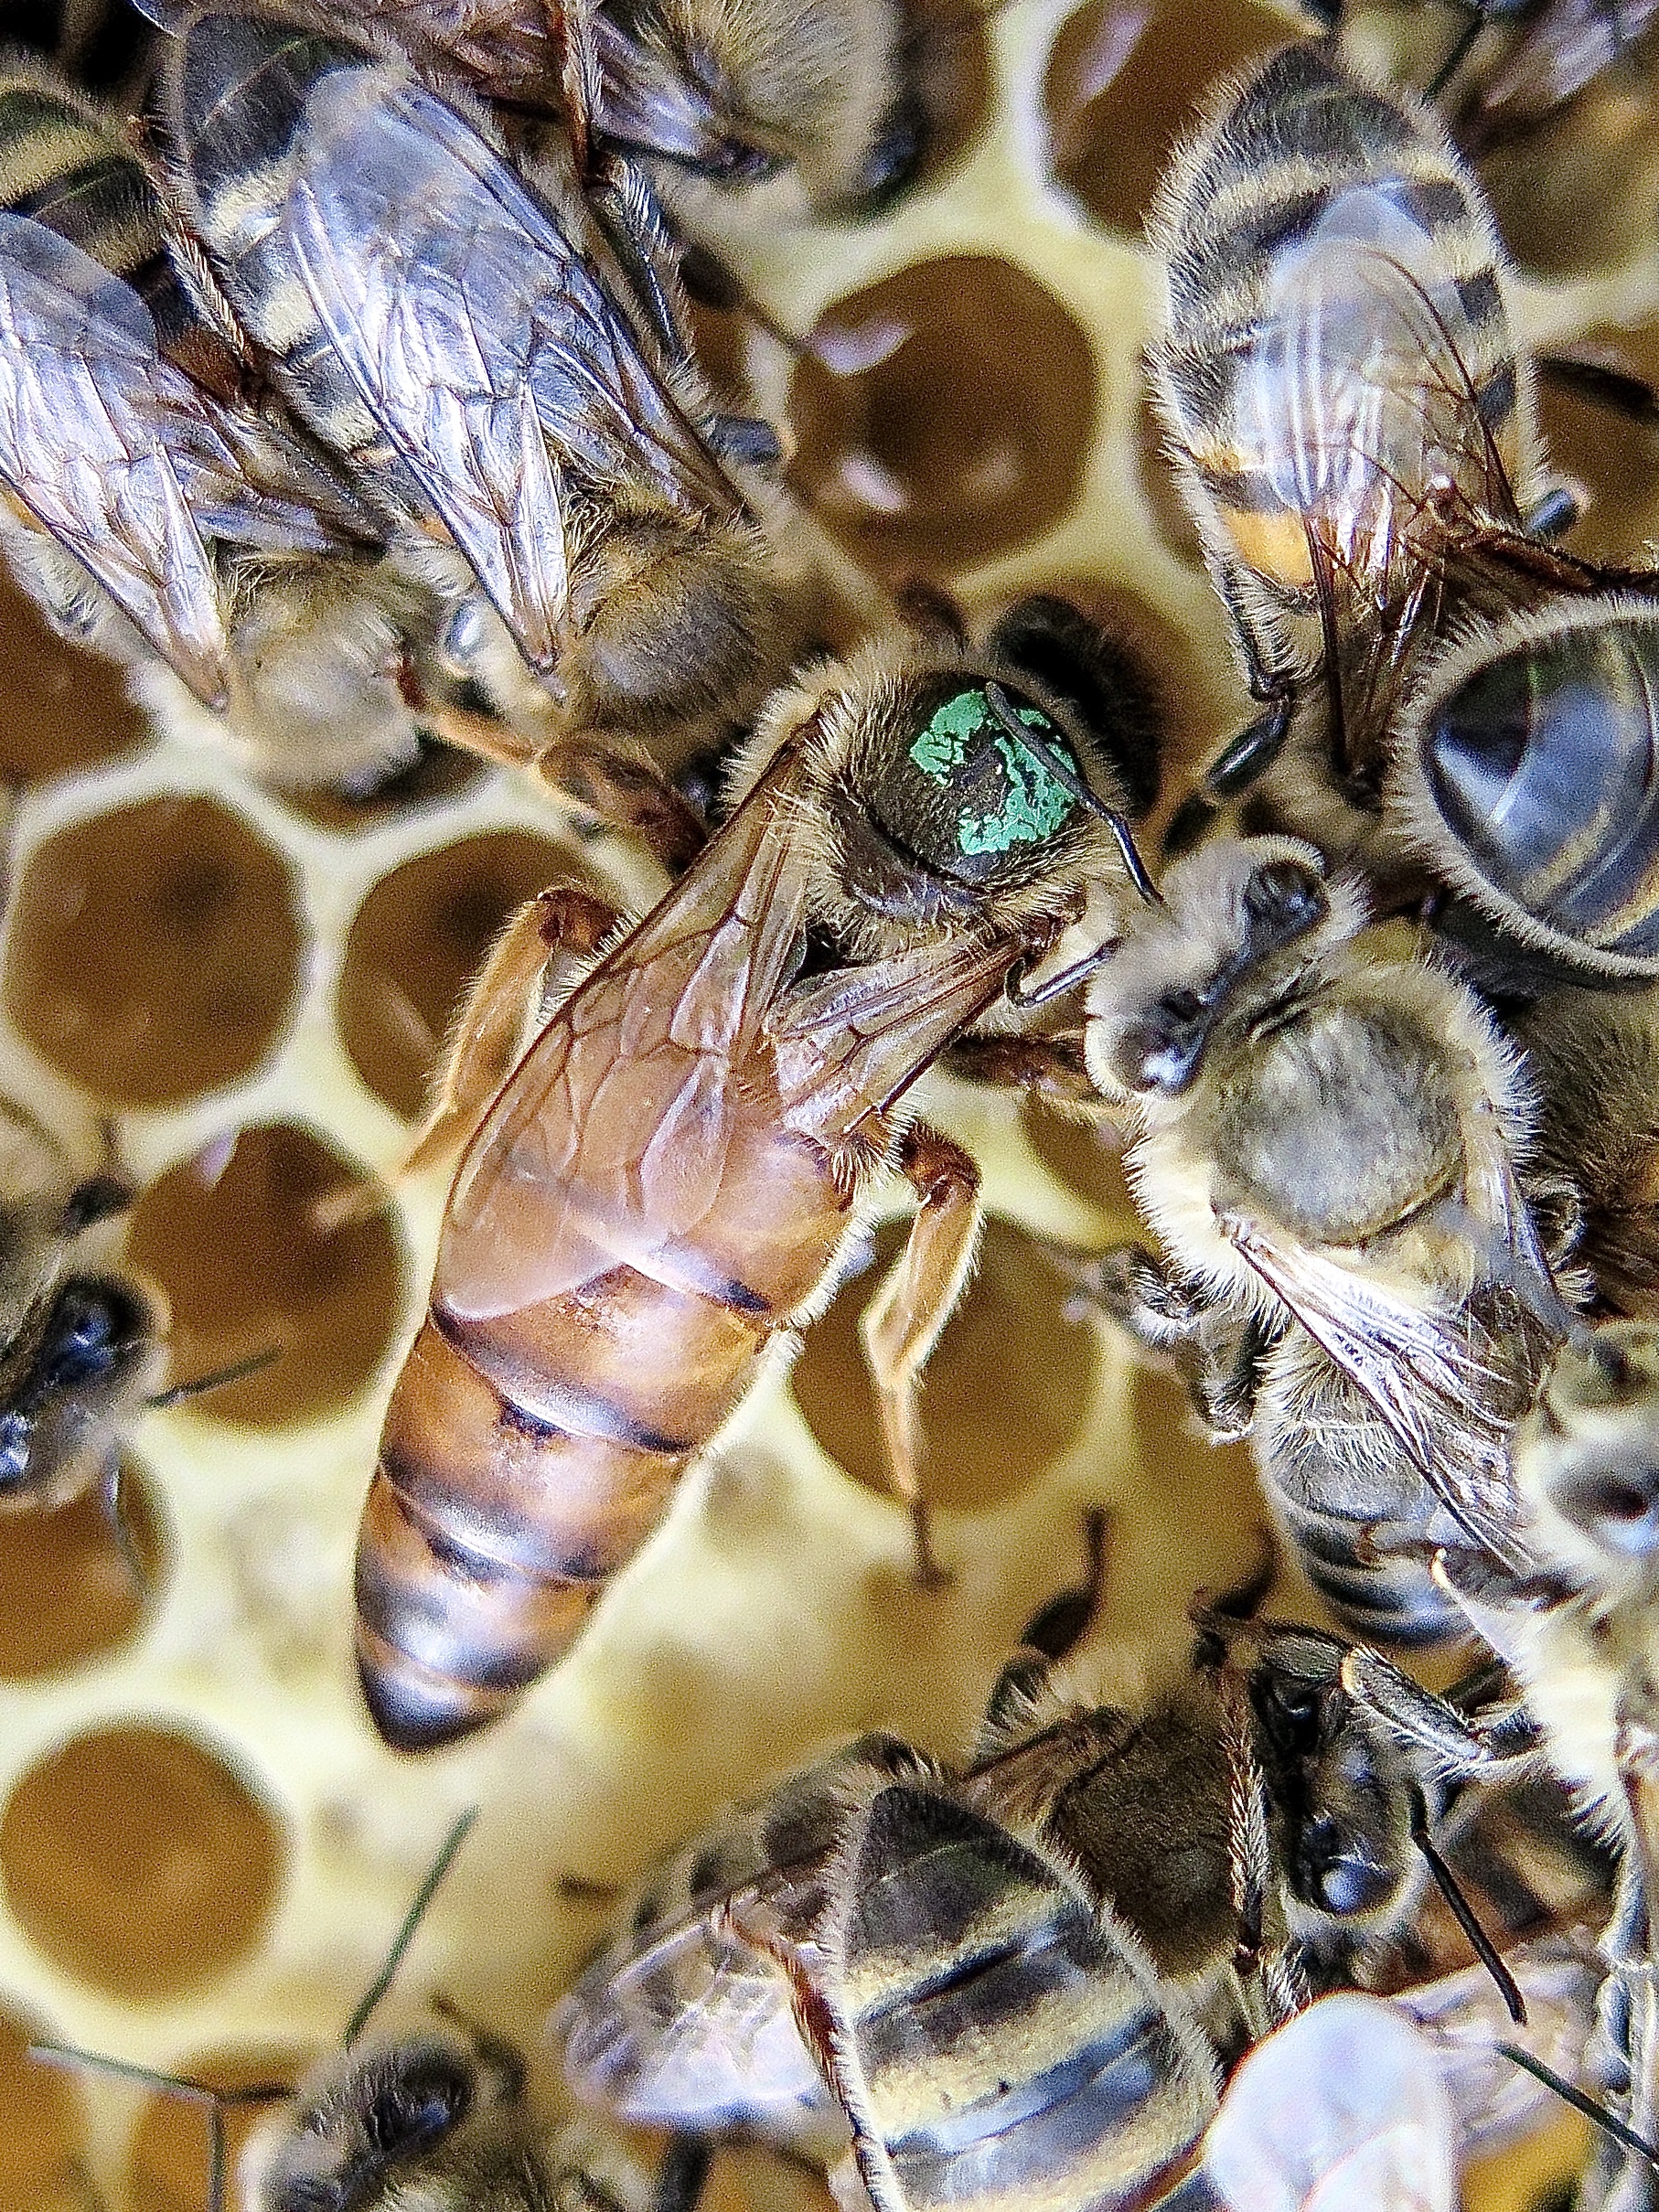 Why Does A Queen Bee Have A Coloured Dot On Her Head?